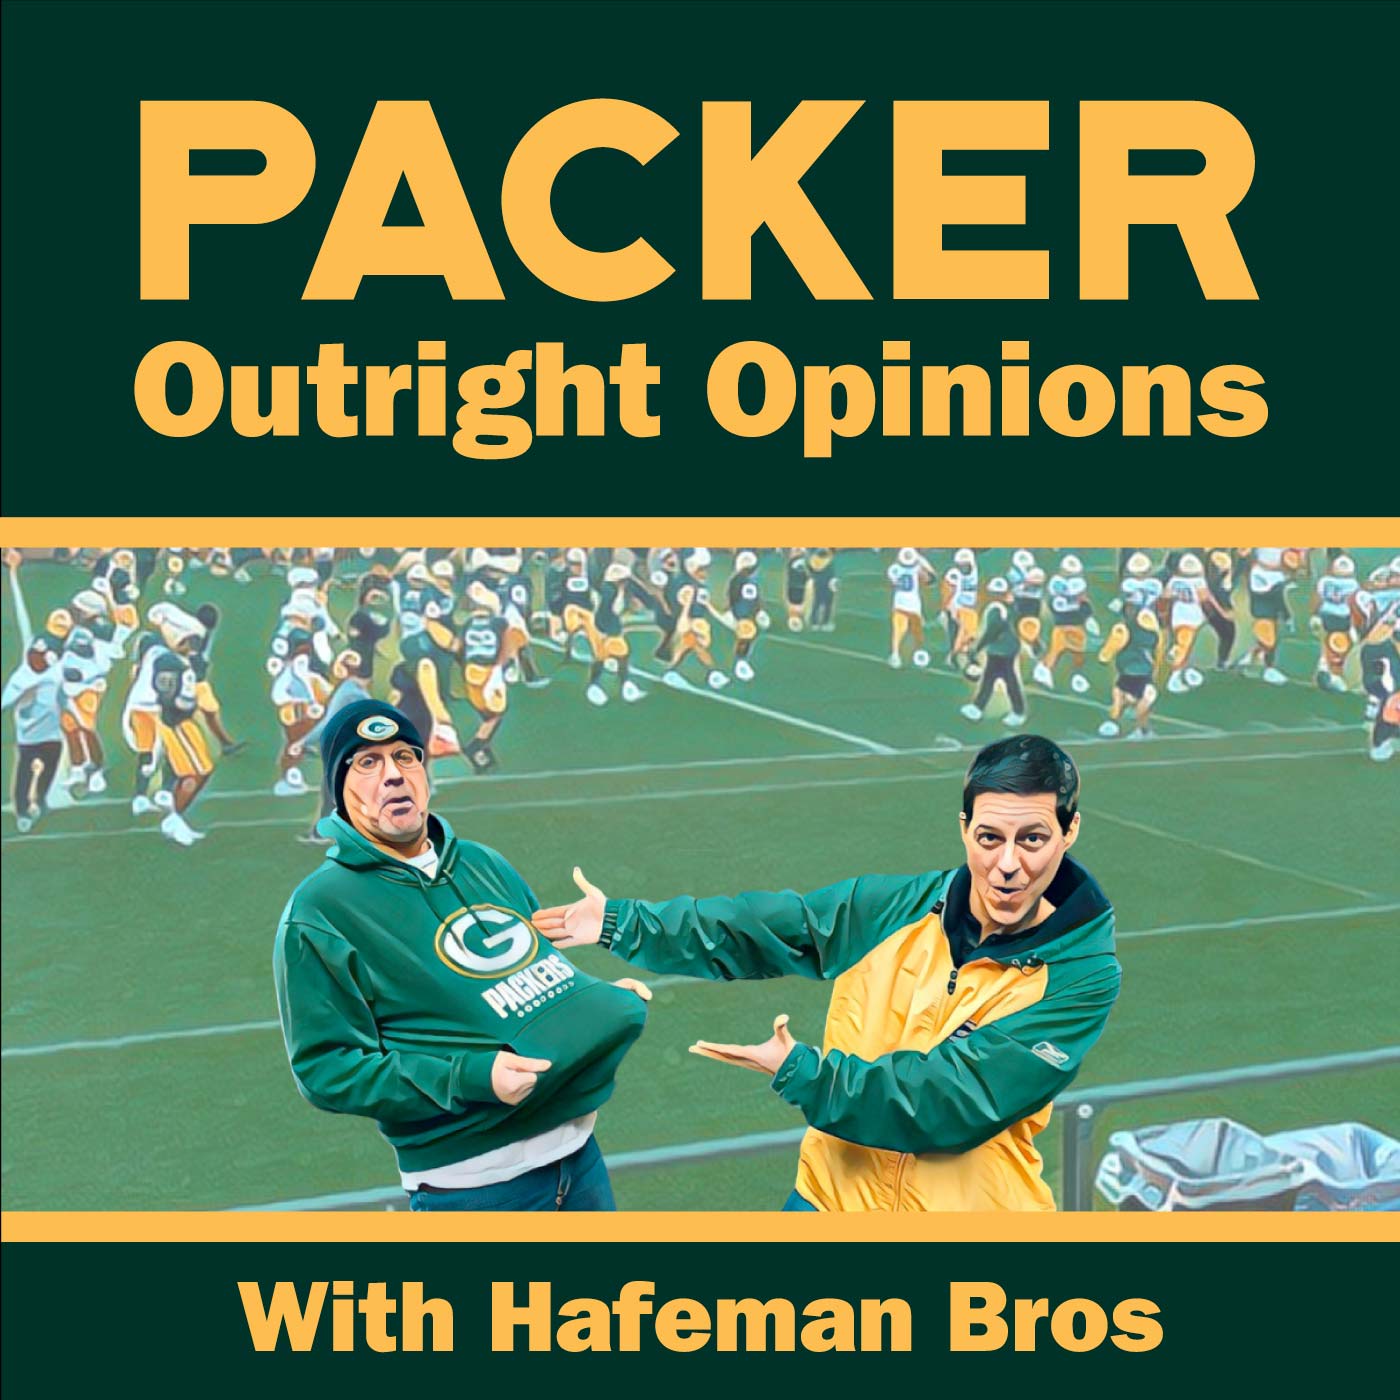 Packer Outright Opinions